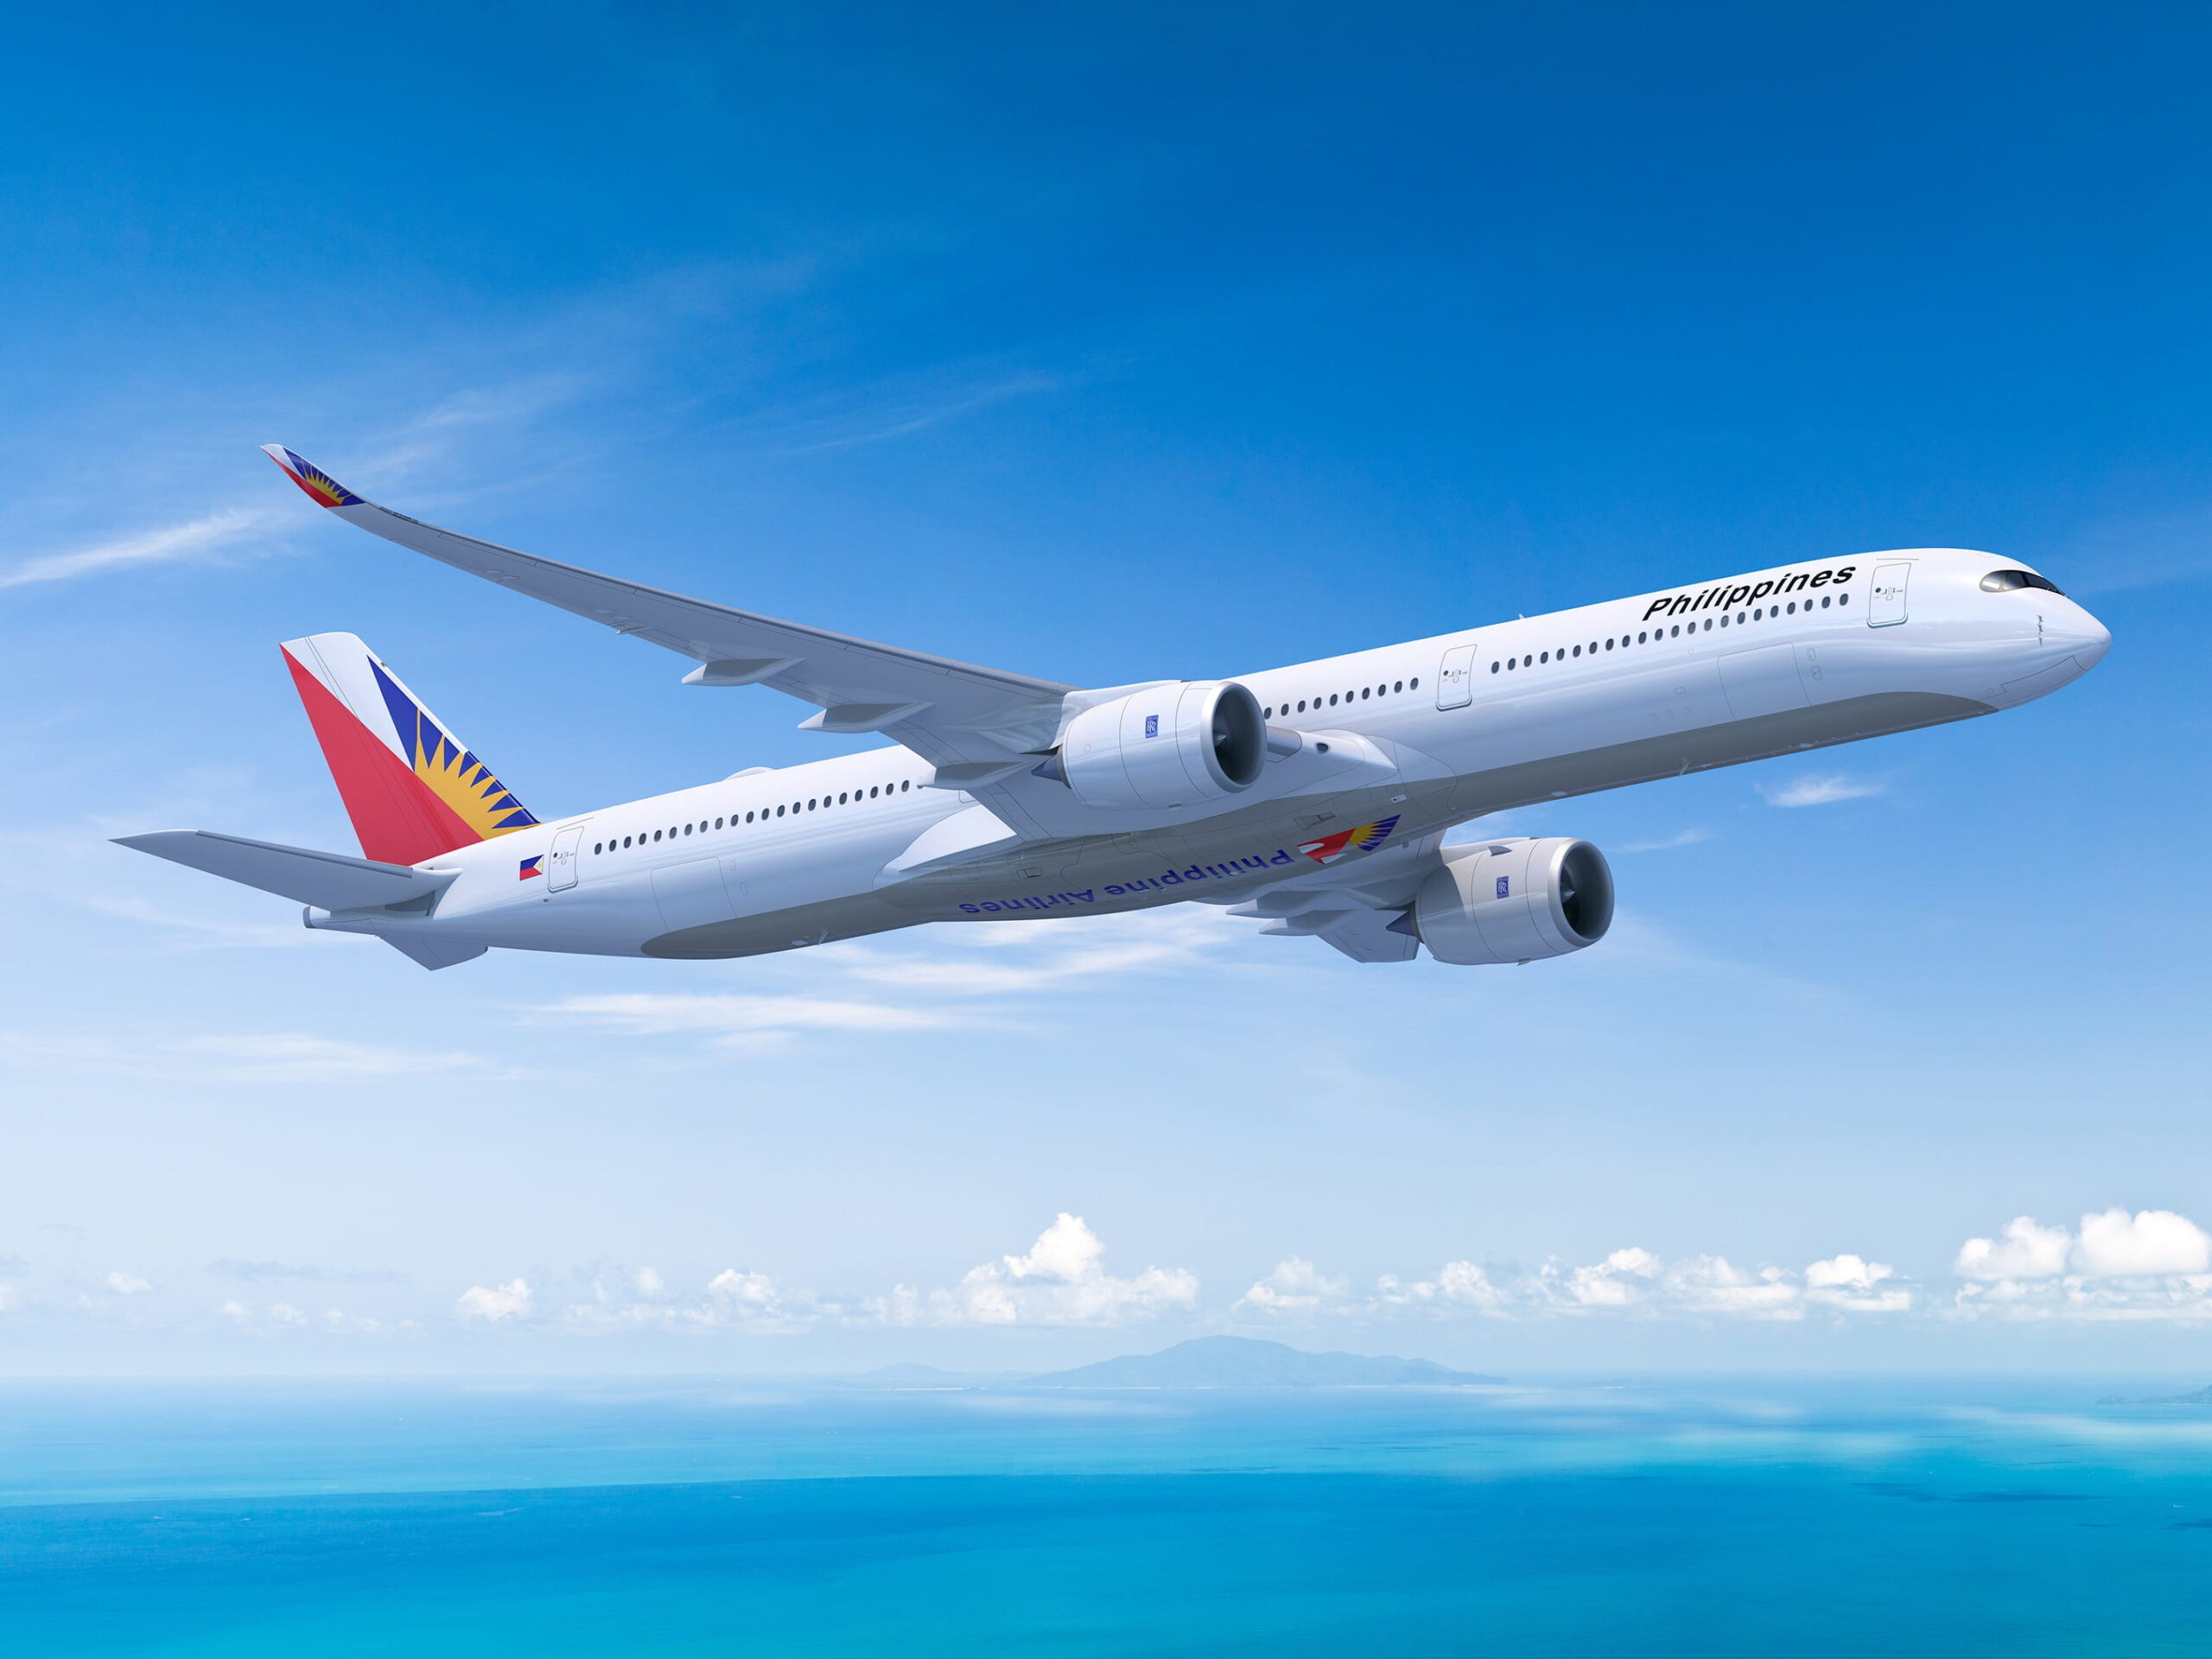 PAL, Expedia tie up in new all-in-one travel booking website